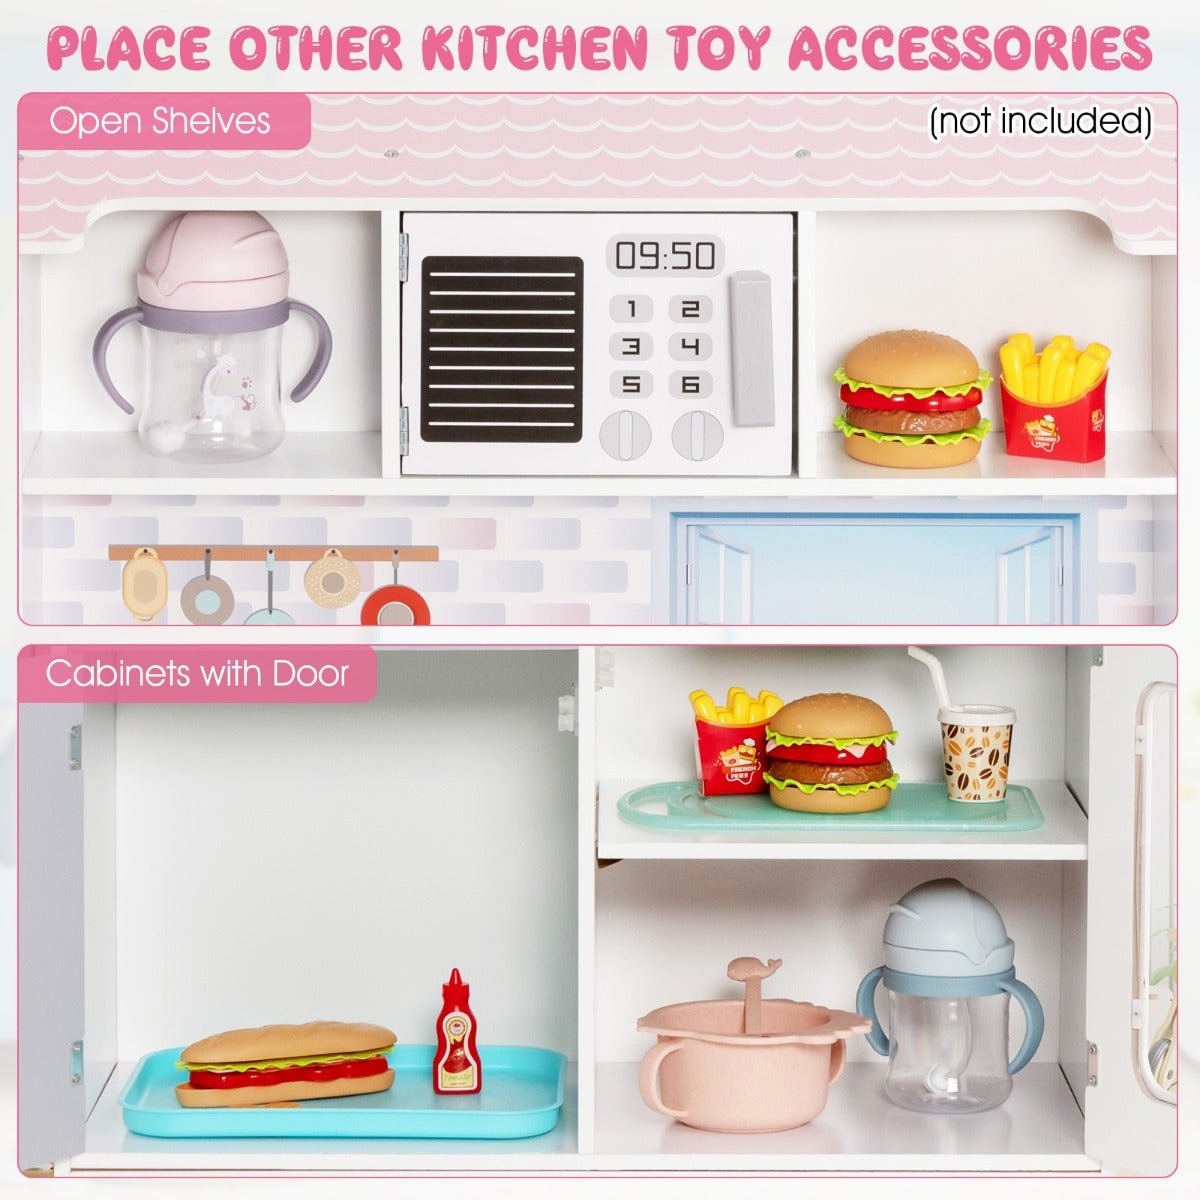 Versatile Playset: 2 in 1 Wooden Doll House and Play Kitchen with Accessories